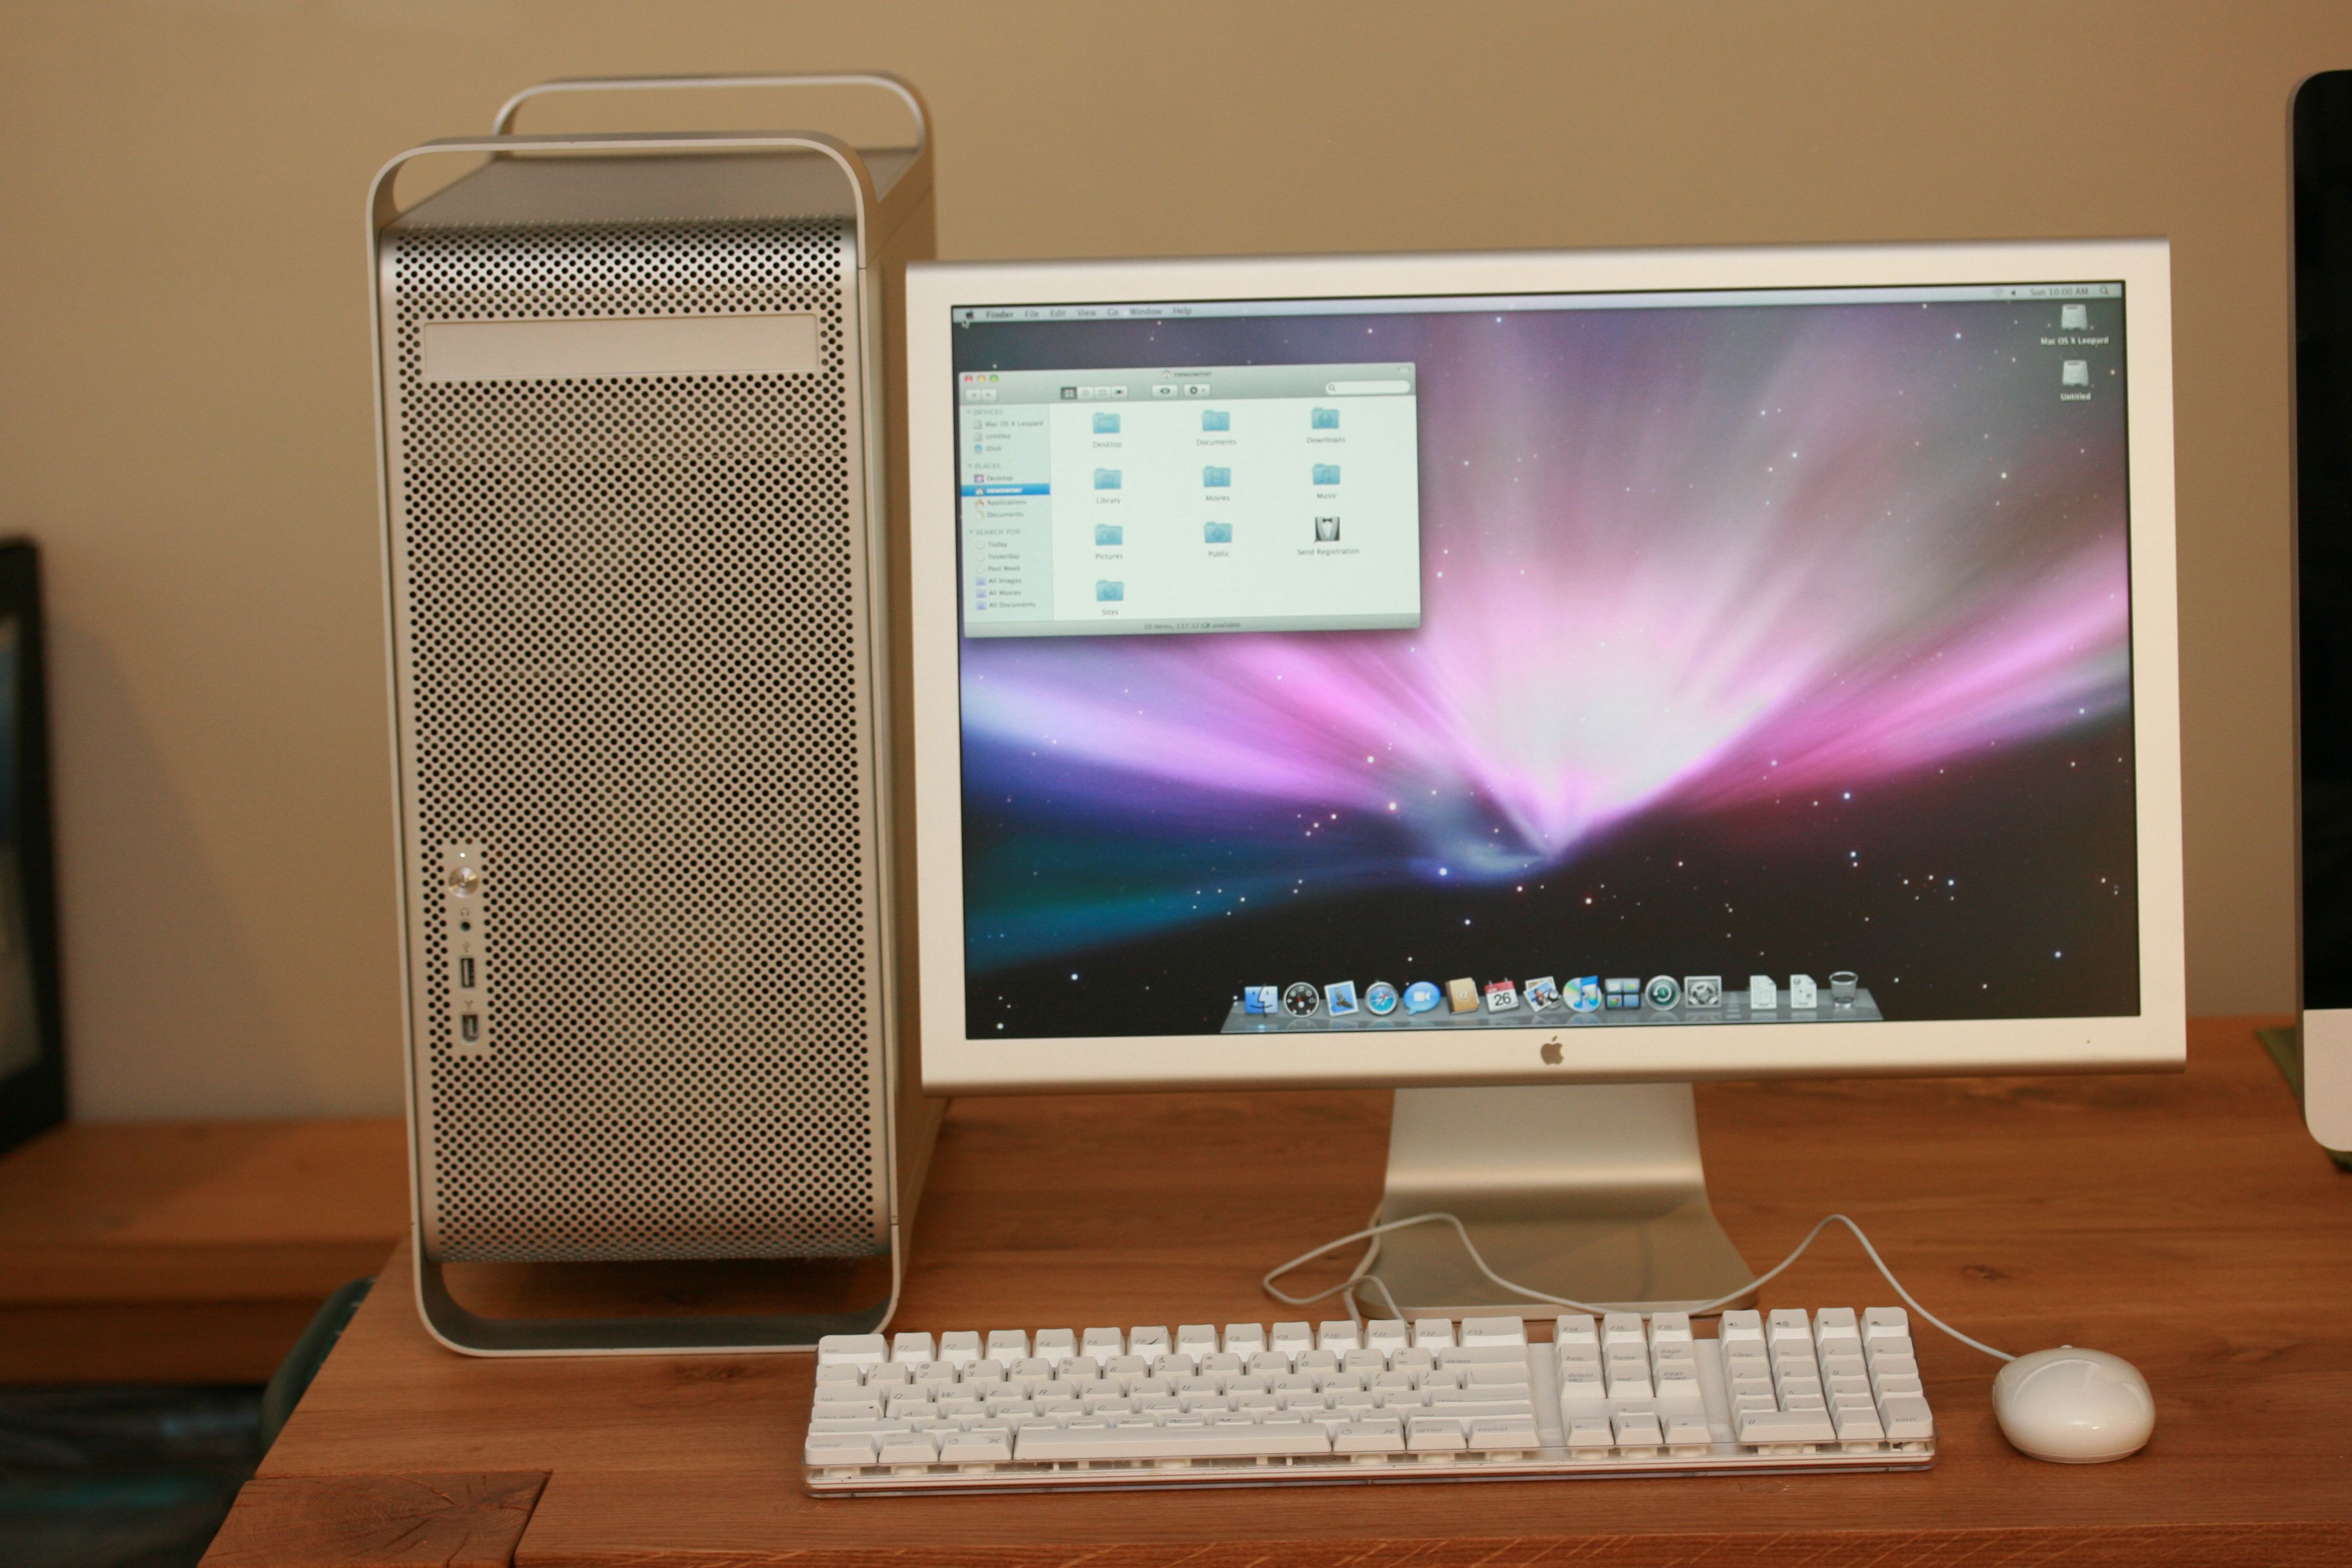 apple power mac g5 at a low price call 01717-071648 large image 0